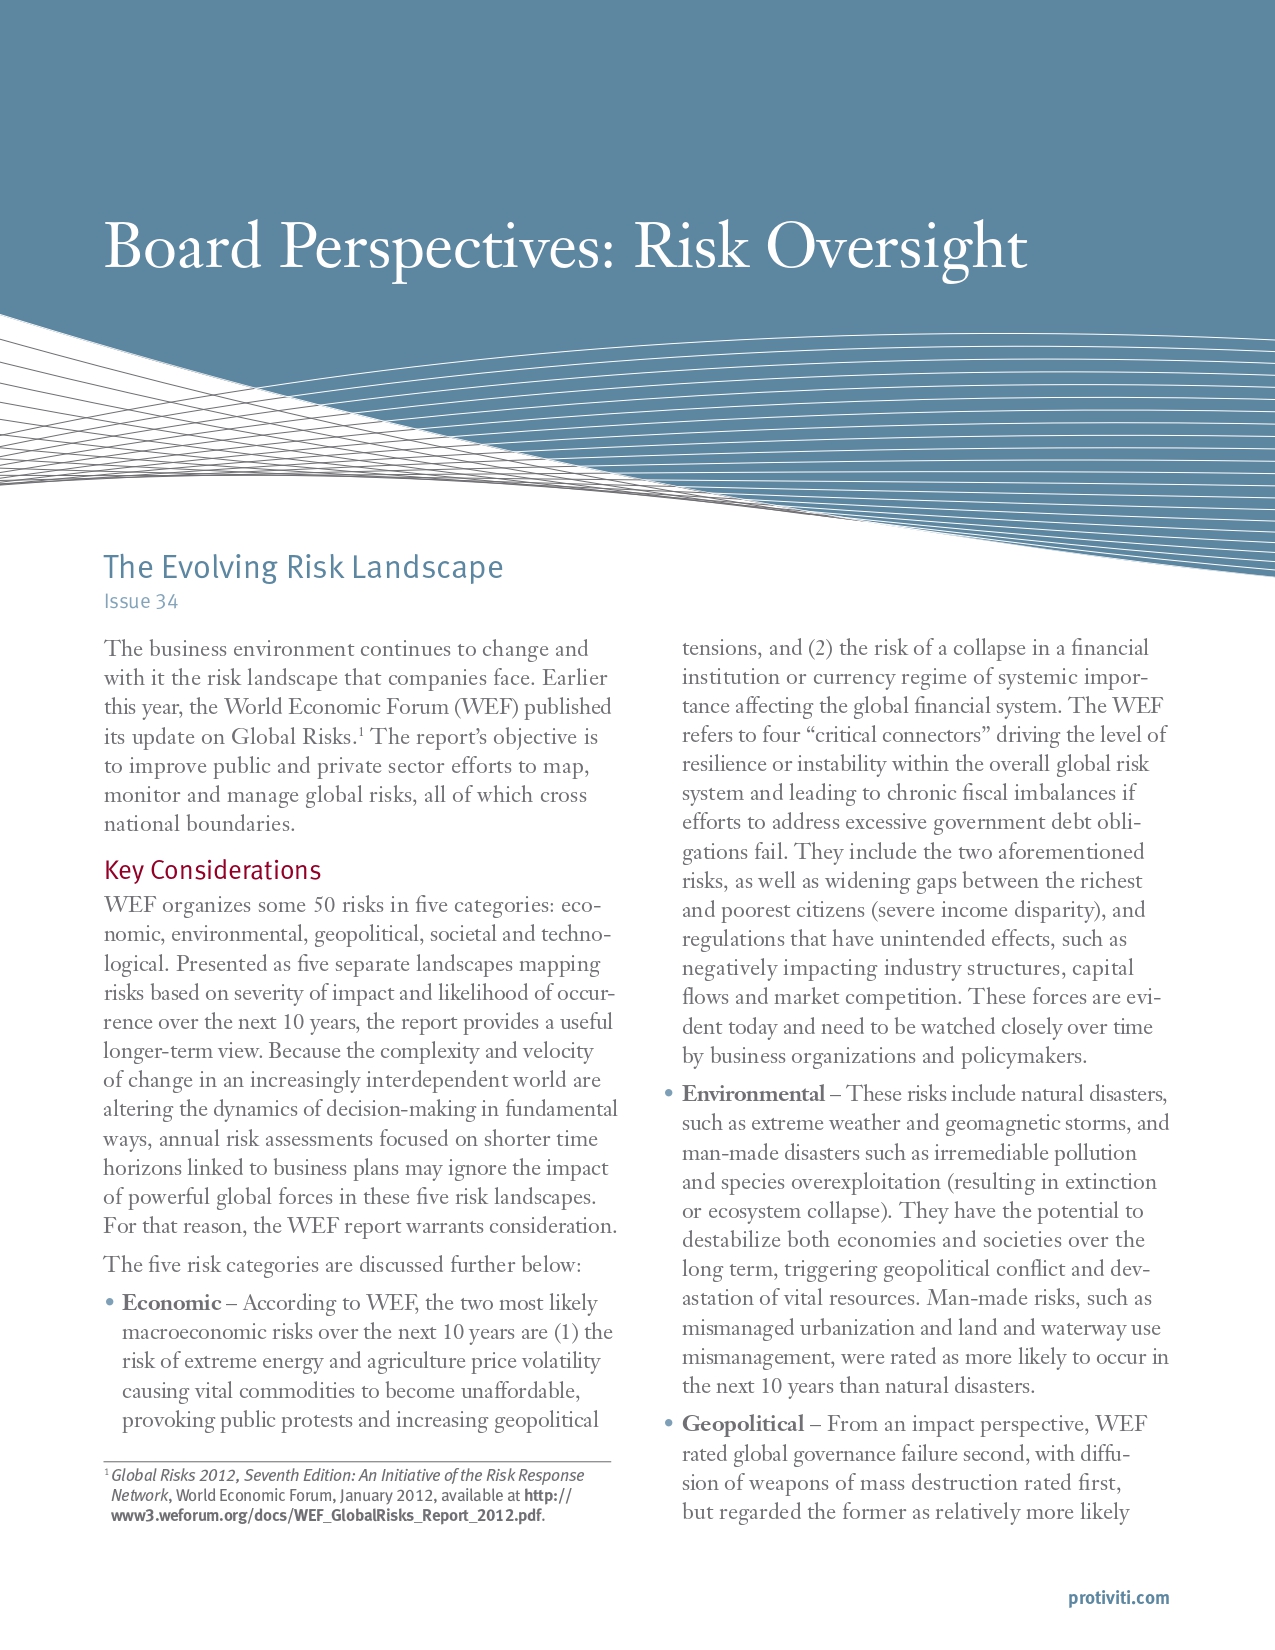 Screenshot of the first page of The Evolving Risk Landscape